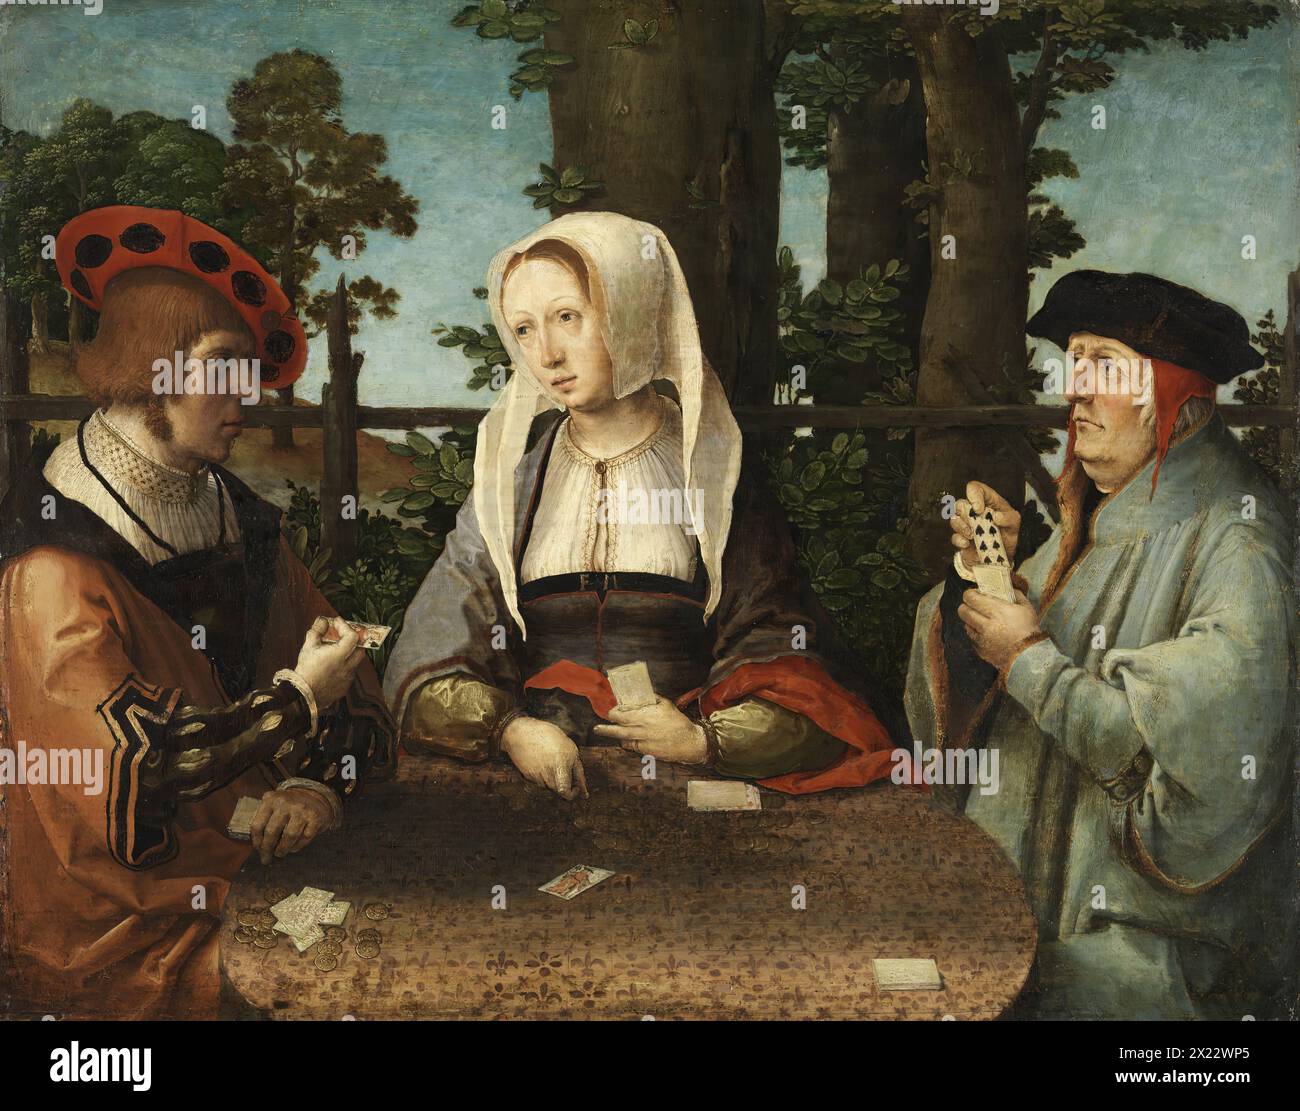 The Card Players, 1520. A woman flanked by two men seated around a circular table that occupies the foreground of the painting. On the table top, which has a print of fleurs-de-lys, are a number of small stacks of cards and piles of money. The woman, positioned frontally, points to the jack of spades while the young man on our left has the king of spades in his hand and looks at the other man who shows him the eight of spades. The scene takes place in an exterior that contains a limited number of elements, including a tree trunk, a rustic fence and an area of blue sky. It has been suggested th Stock Photo